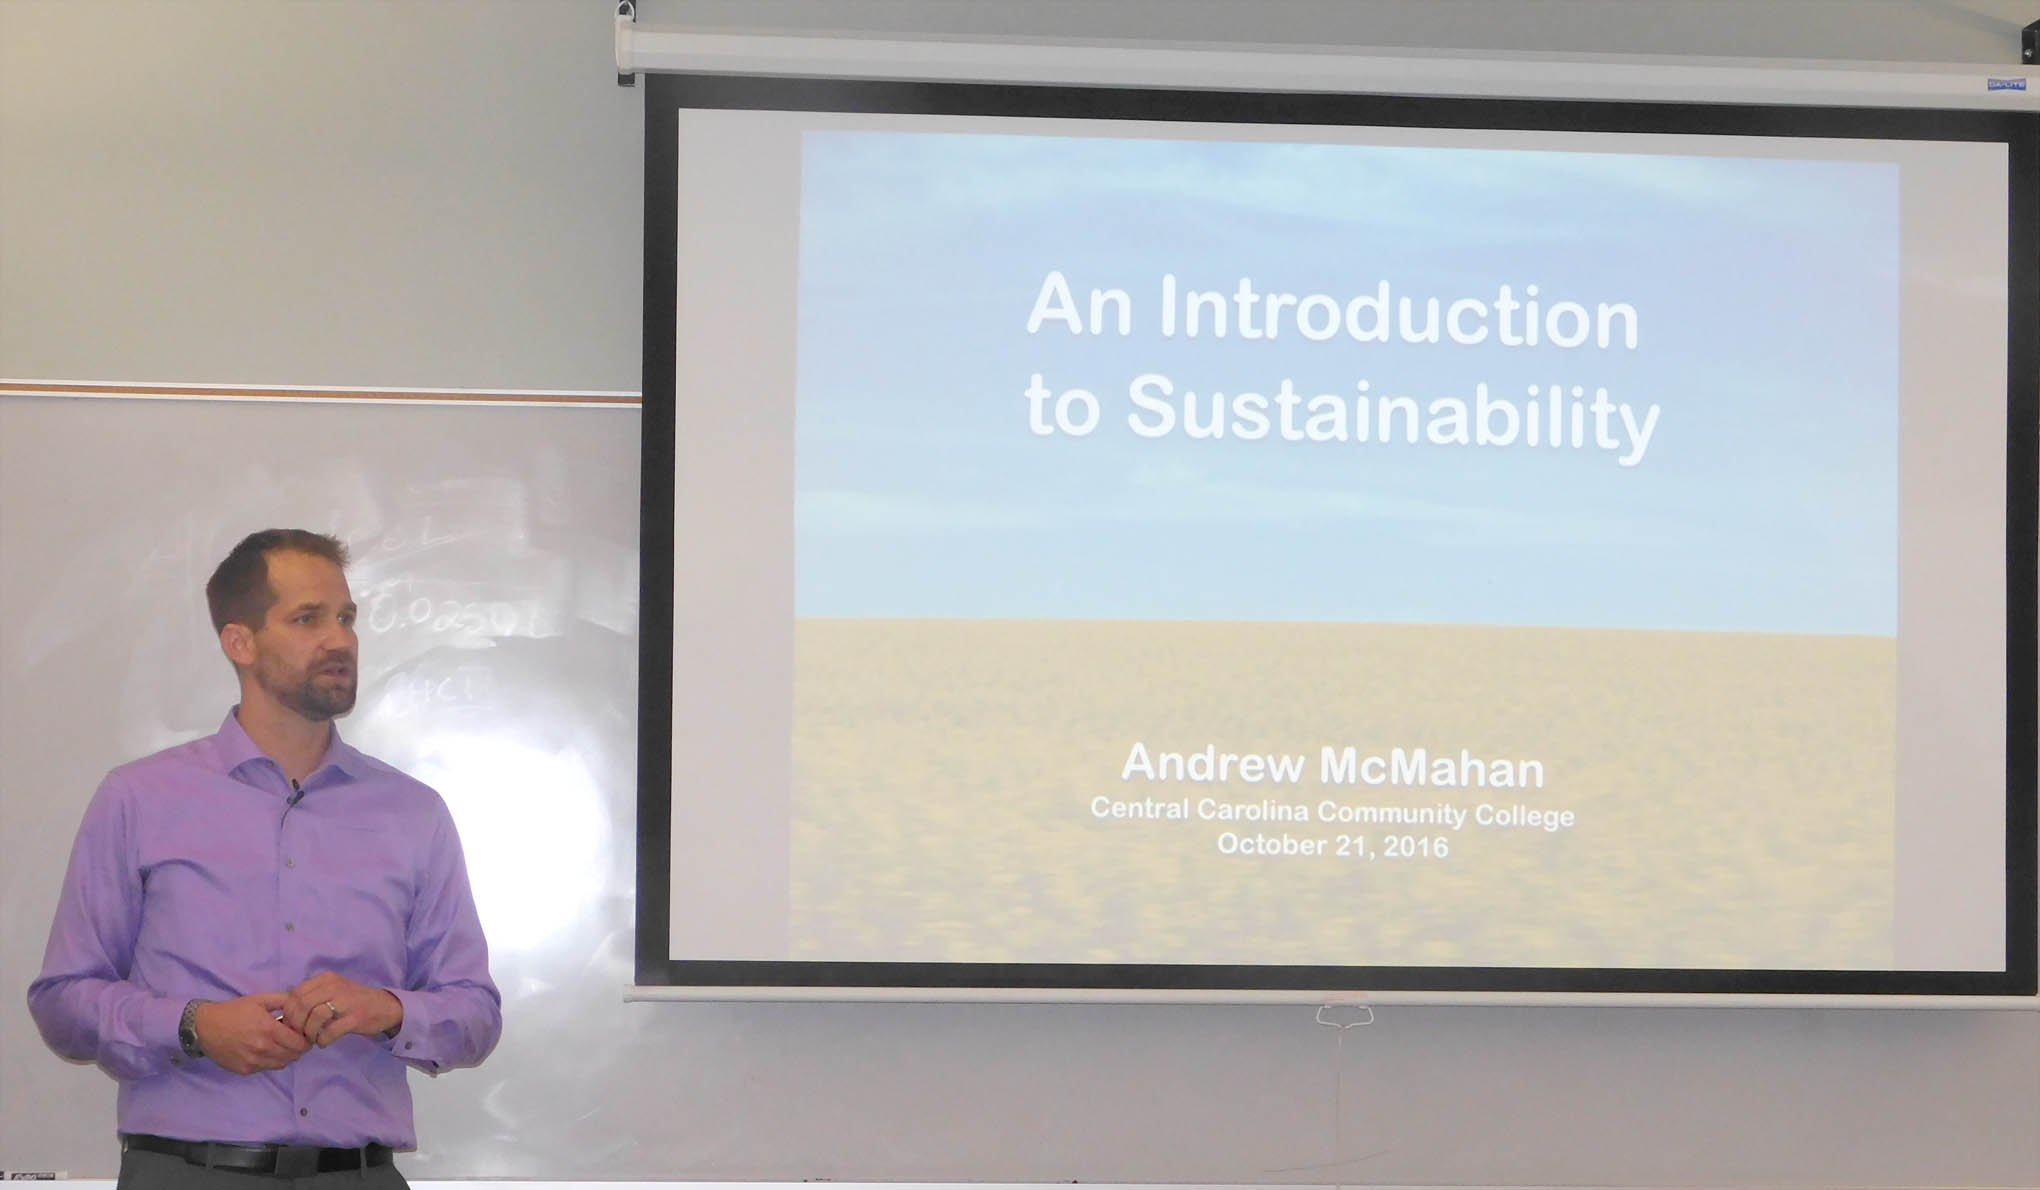 Click to enlarge,  Andrew McMahan, Chair for the Department of Sustainability at Central Carolina Community College, was the speaker for the college's first sustainable speaker series sponsored by the Richard and Rebecca Hayes Endowed Lecture Fund for Environmental Policy and Stewardship through the CCCC Foundation. 